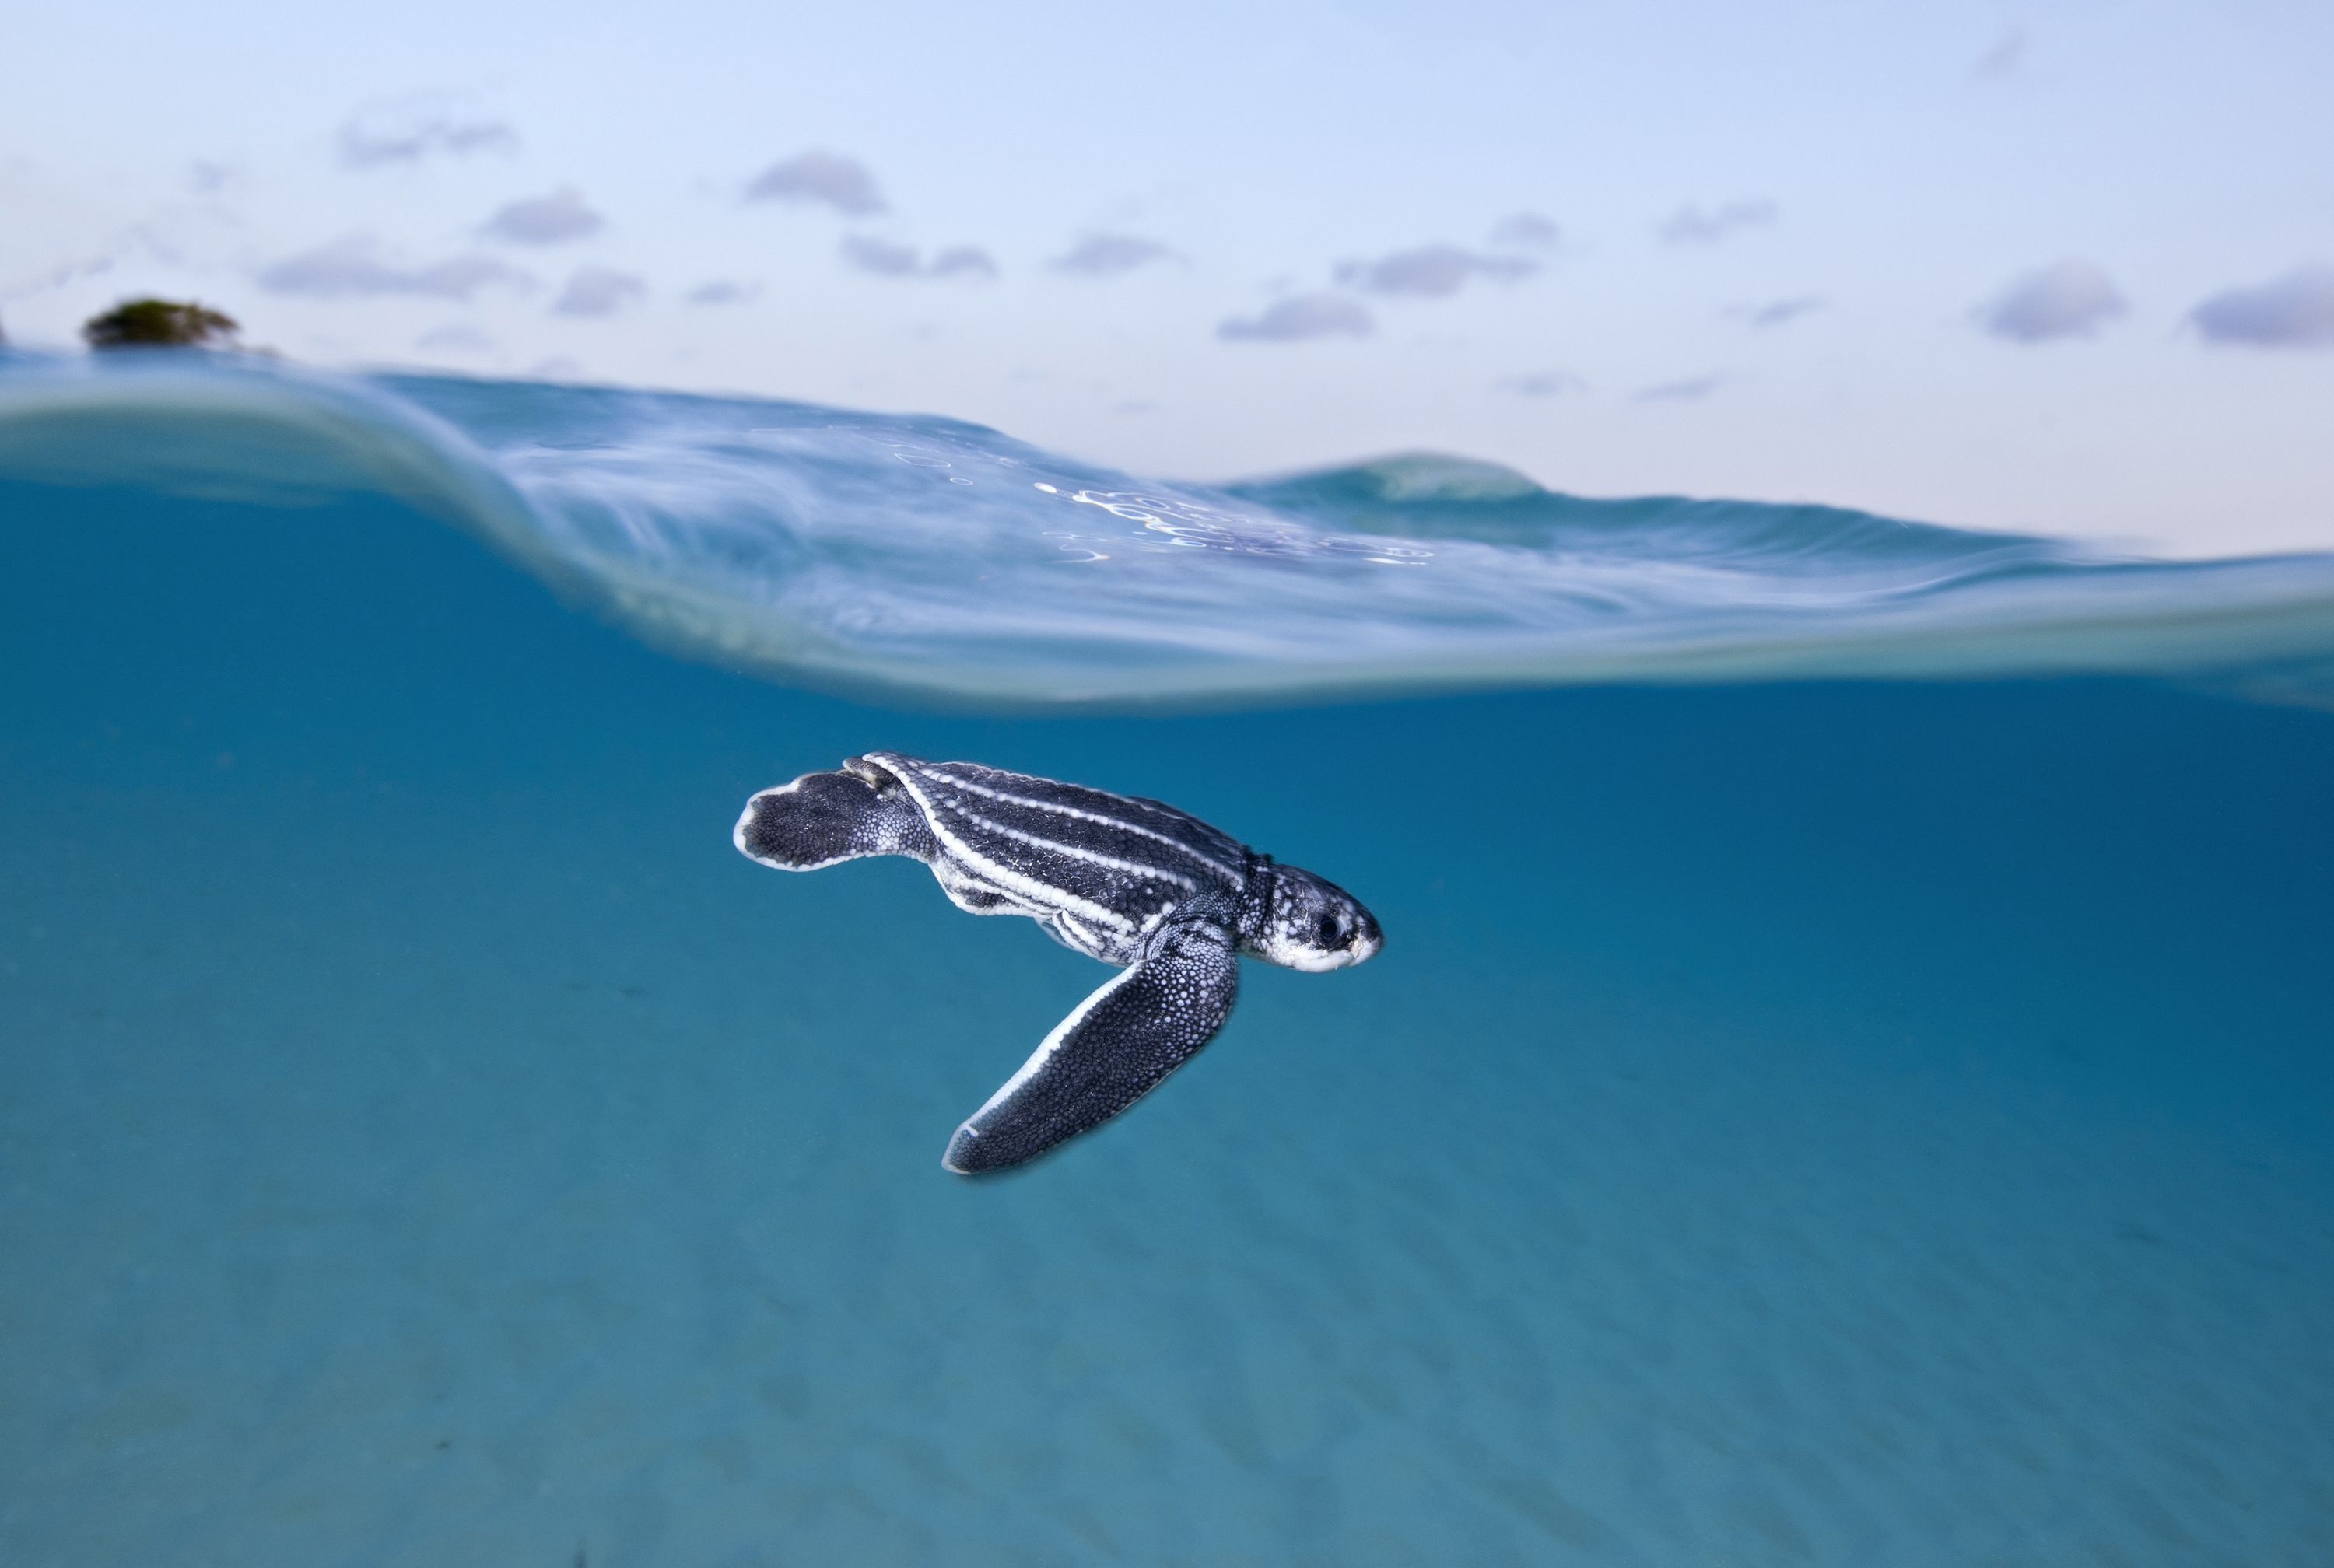 High-quality wallpapers, Exclusive sea turtle images, Stunning HD, Other sites' collections, 3000x2020 HD Desktop